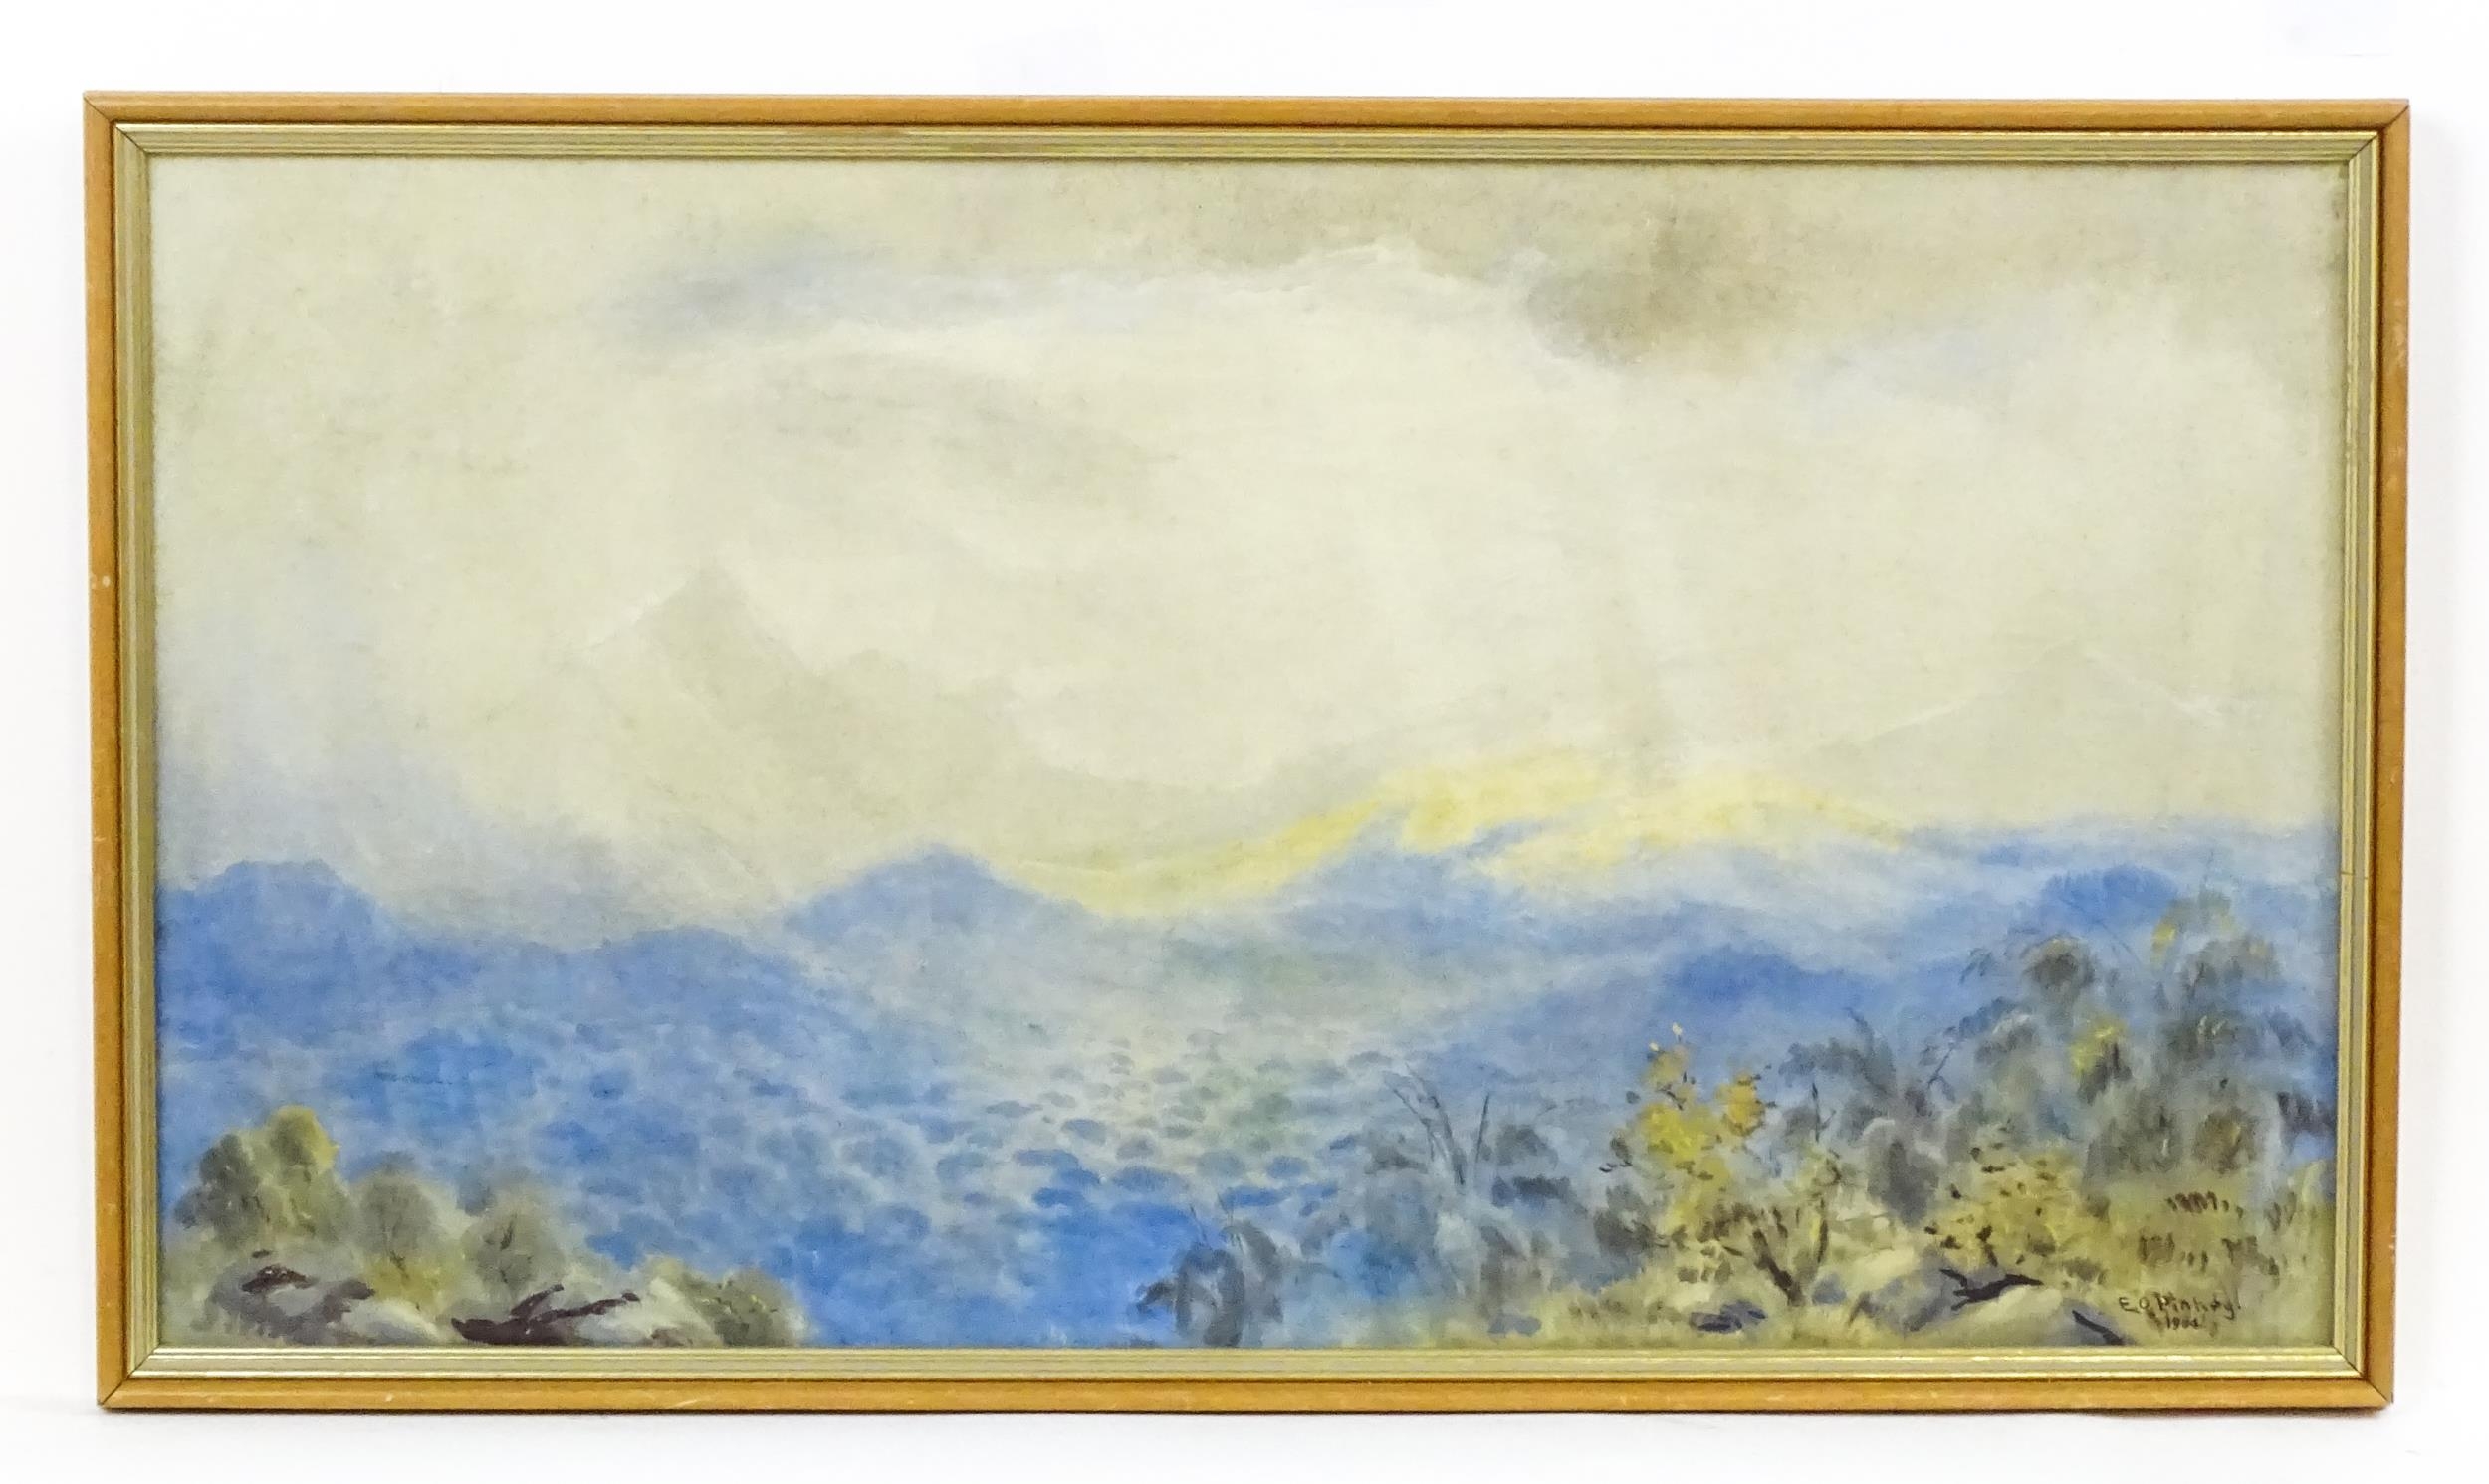 Edith Pinhey, Early 20th century, Watercolour, A Burmese valley landscape with mountains from the